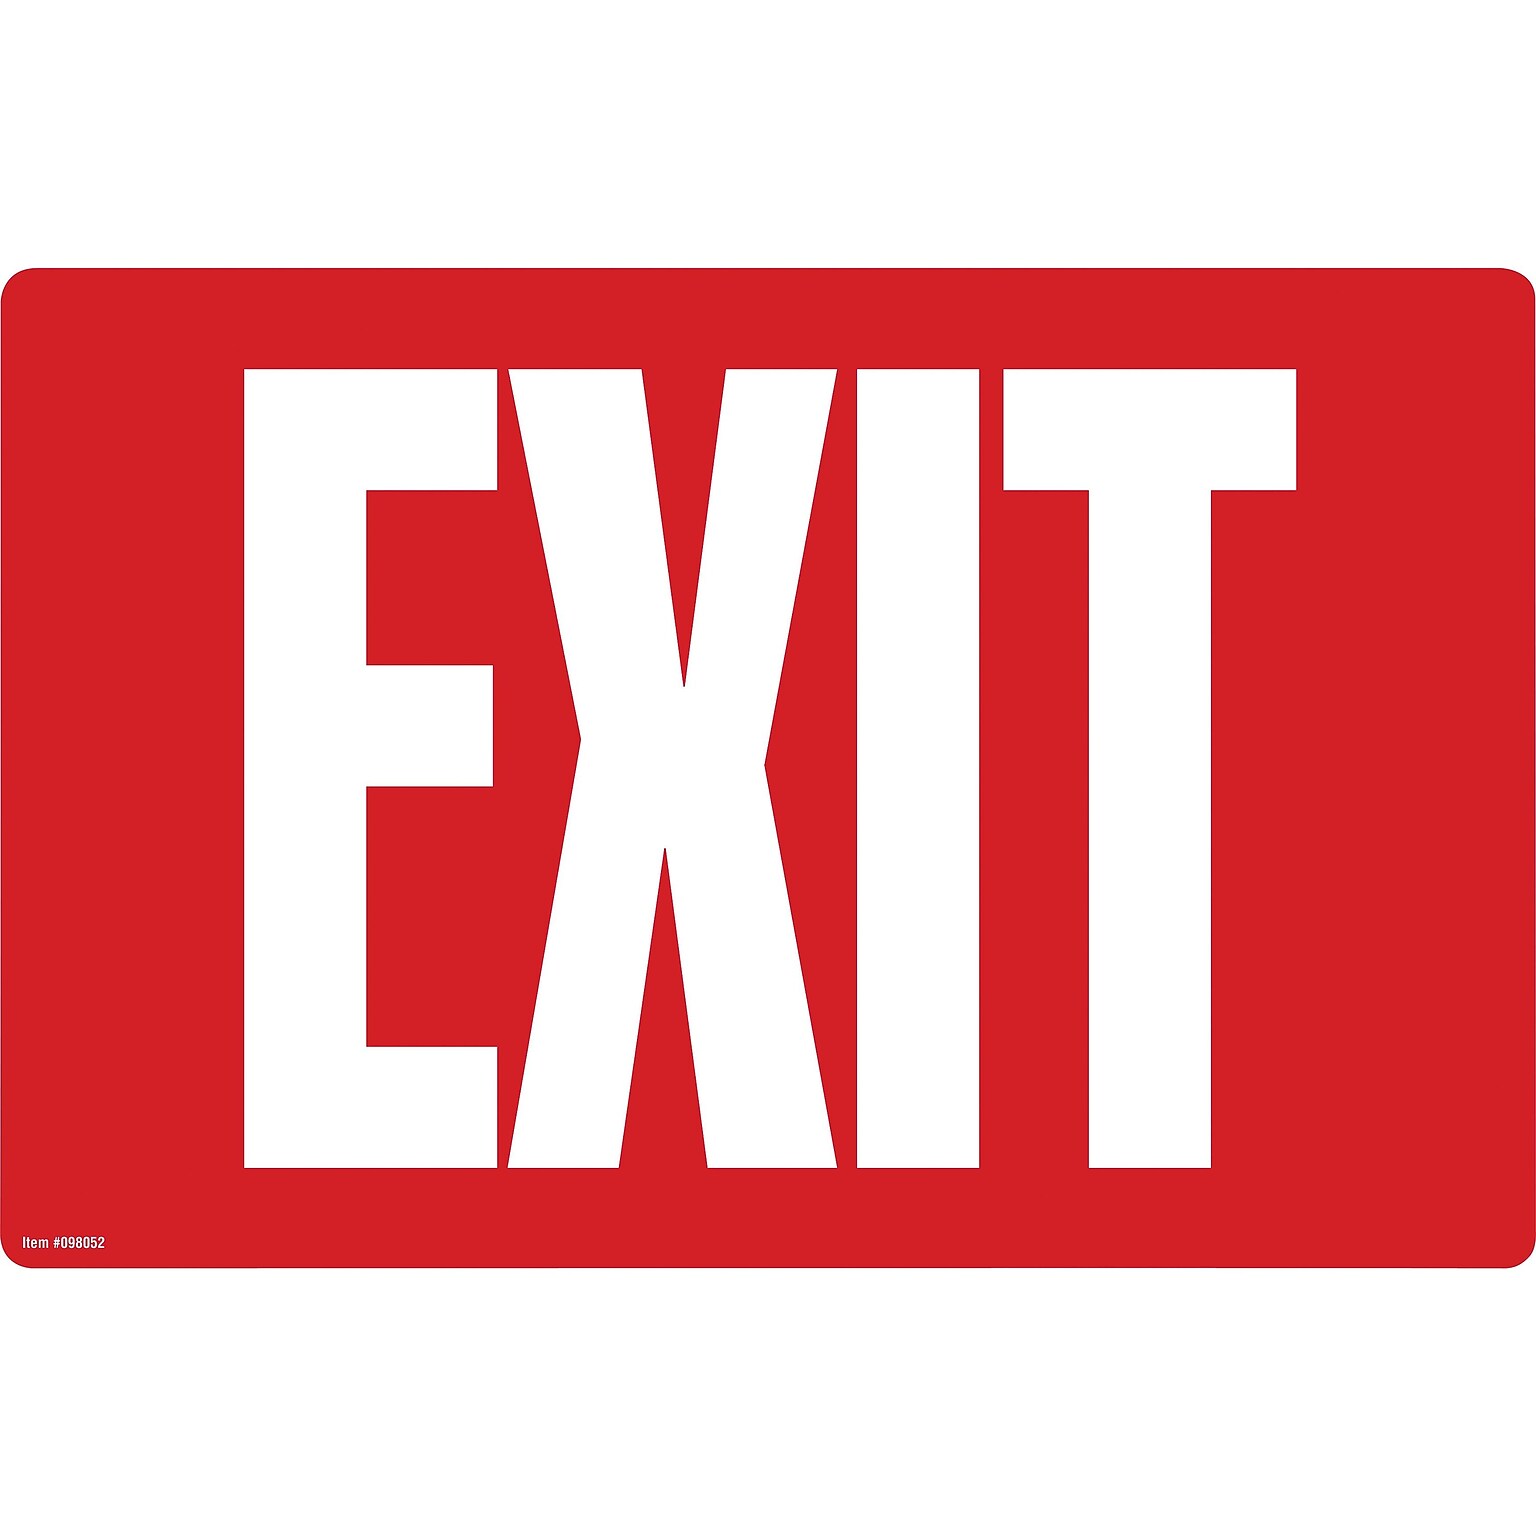 Cosco Exit Indoor Wall Sign, 12L x 8H, Red/White (098052)